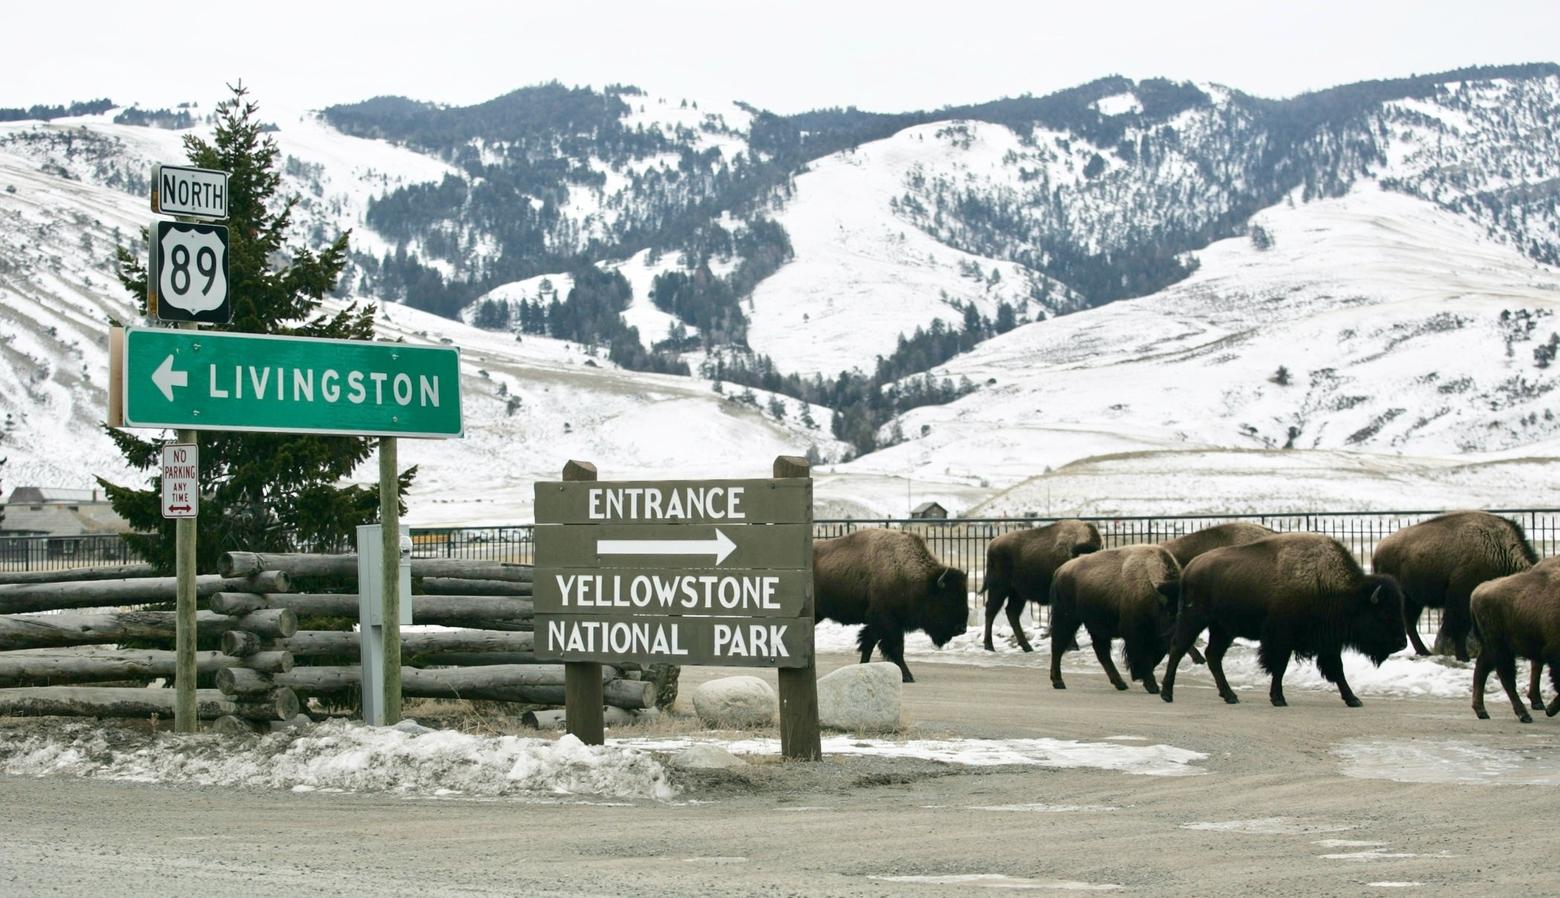 Bison have for centuries migrated from the area now known as Yellowstone National Park north into the land controlled by public and private interests in what's now the state of Montana. With many interests vying for control over bison management, who's acting in the interests of the bison? Photo by Jim Peaco/NPS